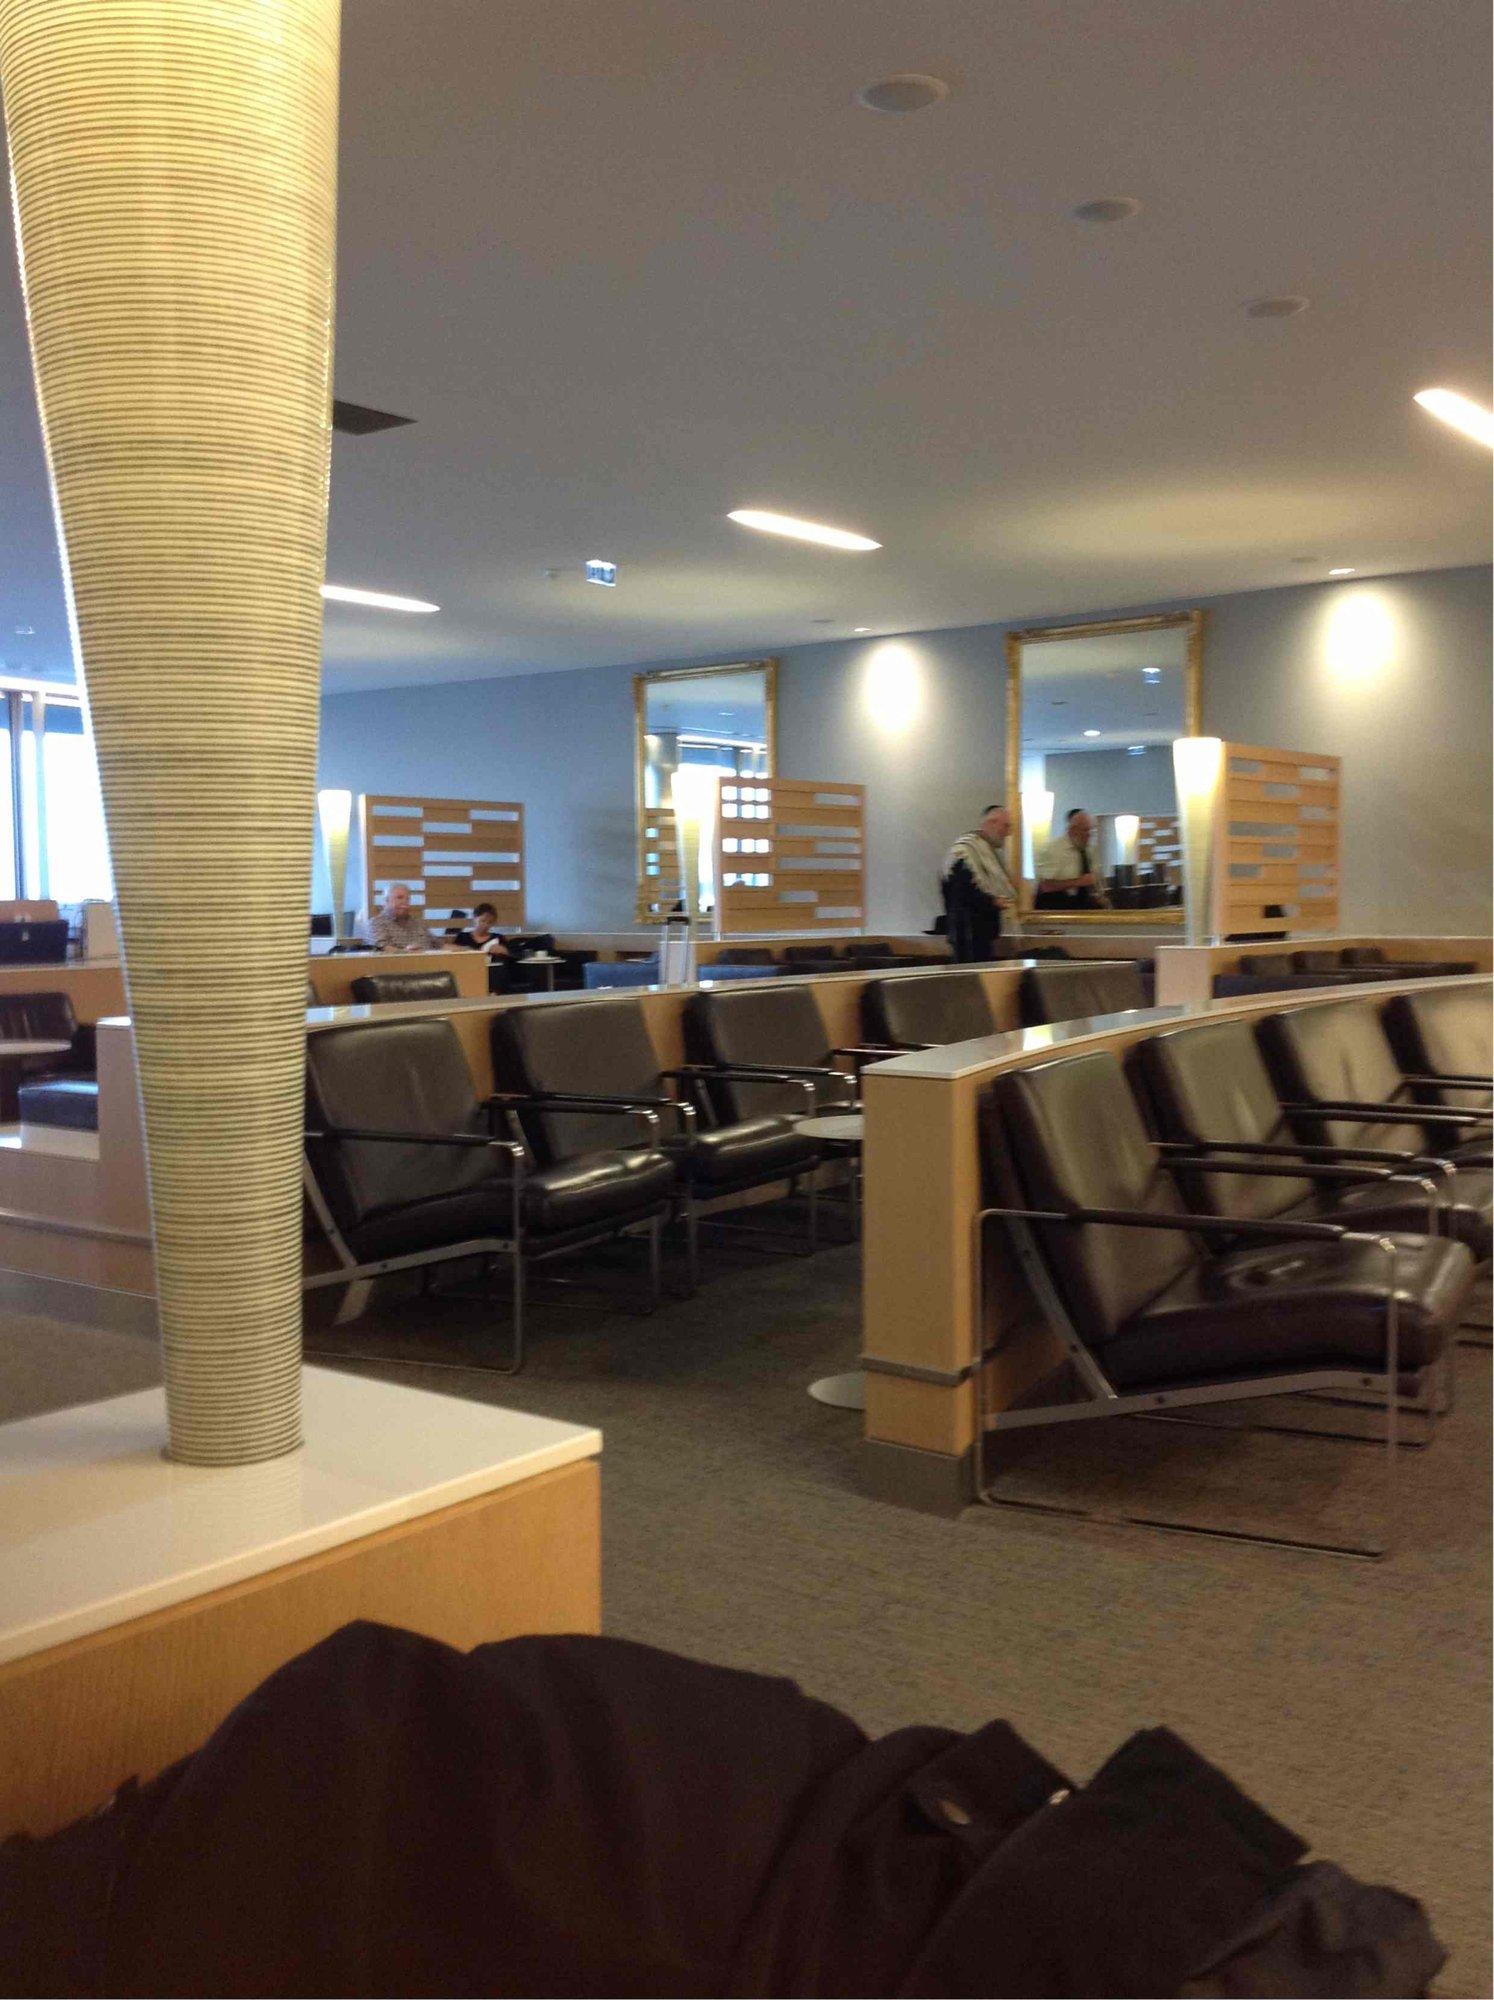 American Airlines Admirals Club  image 14 of 25